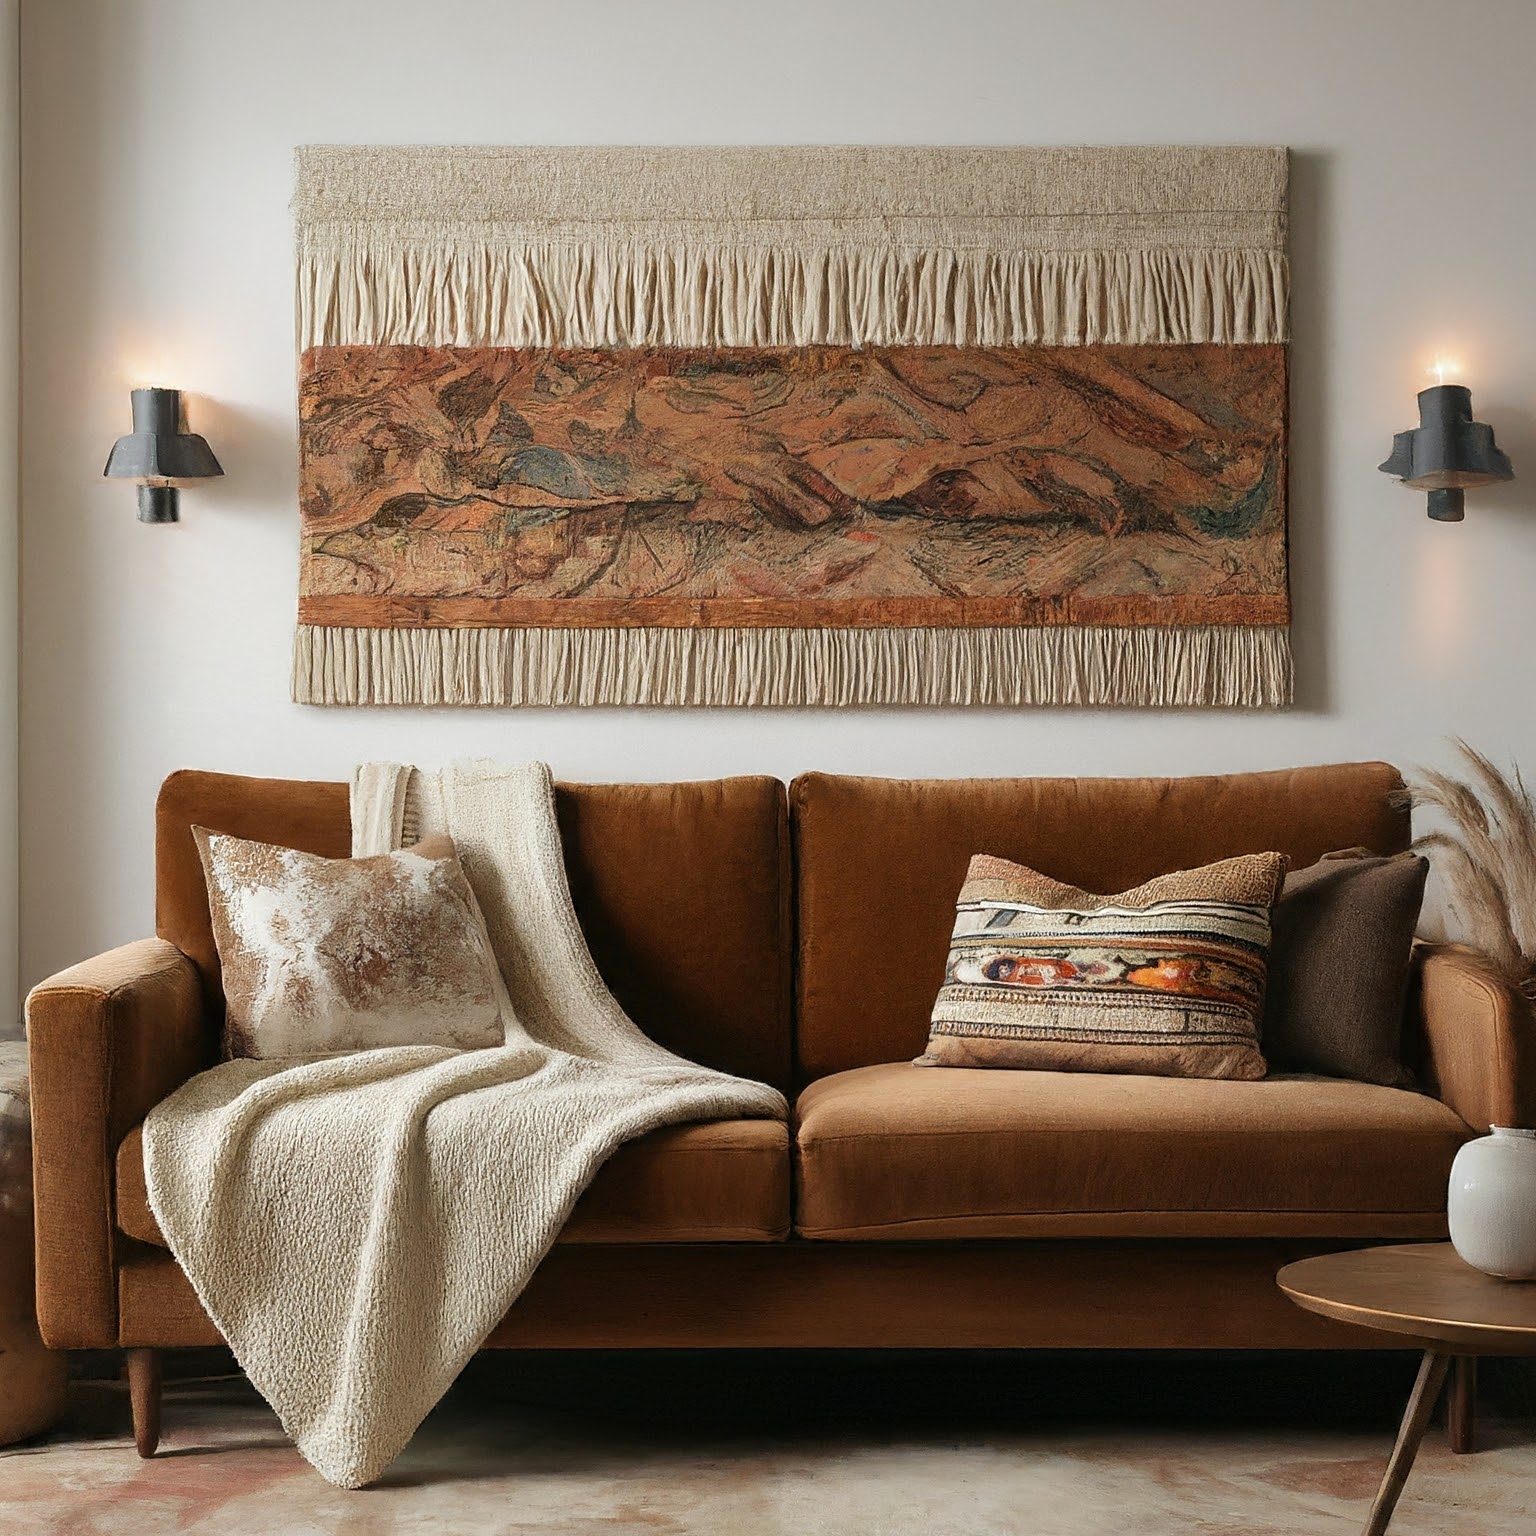 layered textiles for a boho style living room